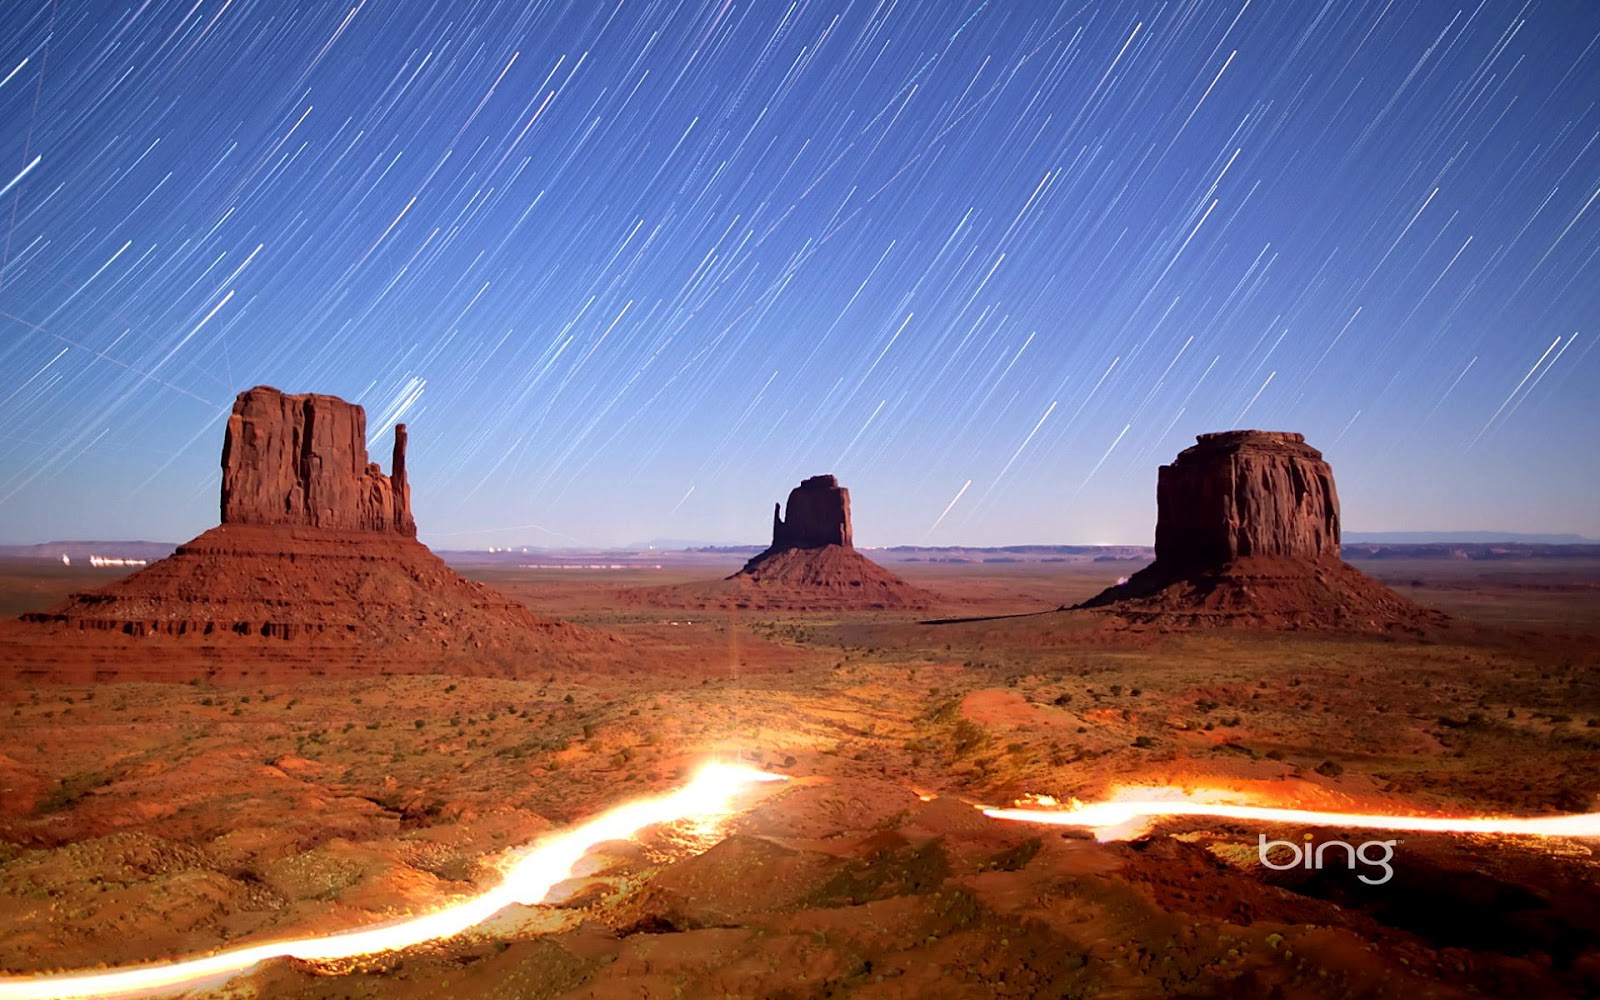 Night Sky And Lights In Monument Valley Navajo Tribal Park